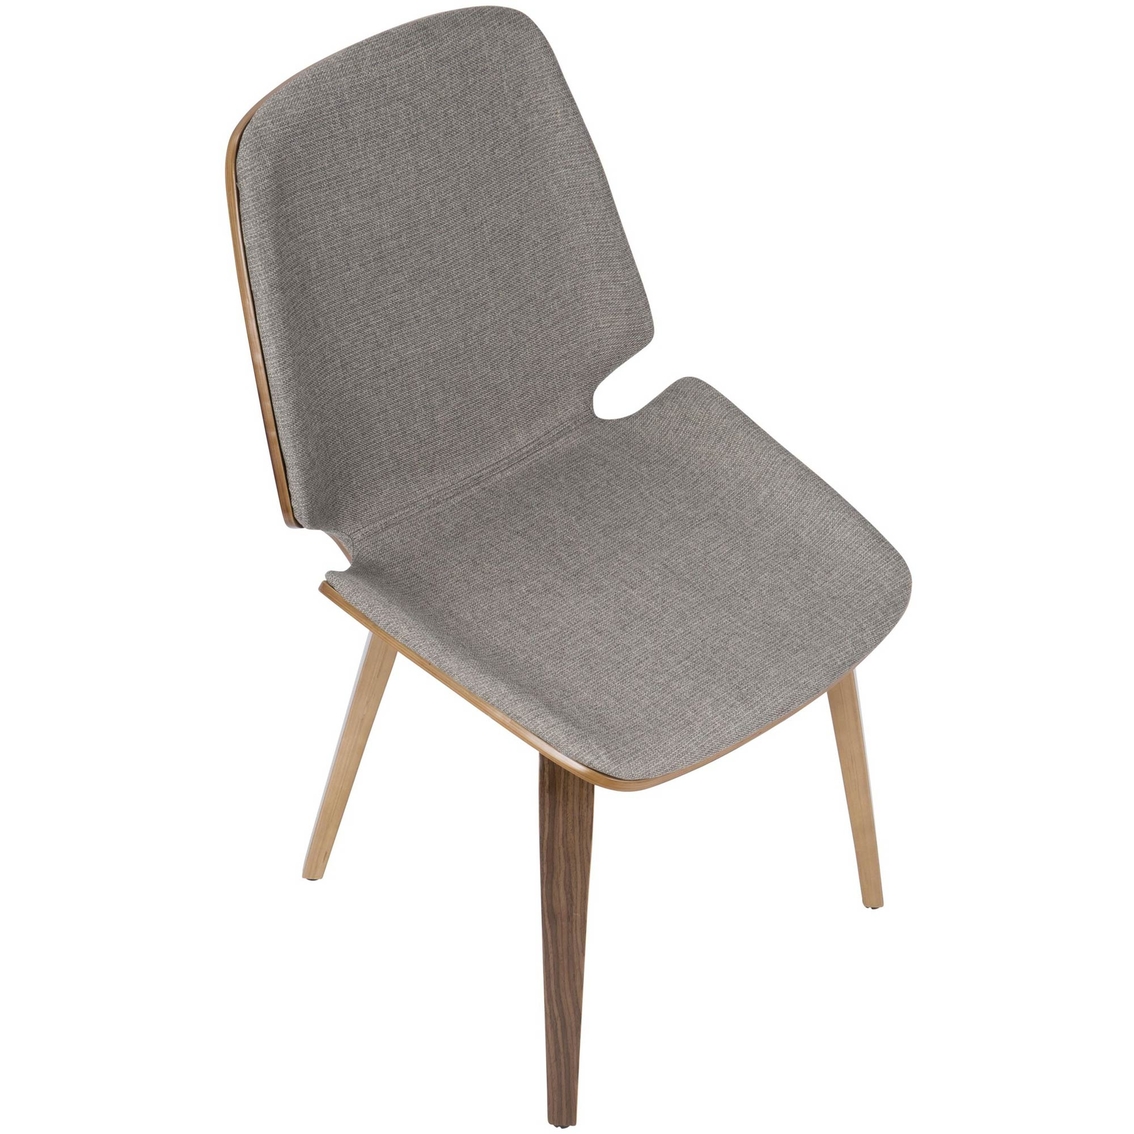 LumiSource Serena Dining Chair 2 pk. - Image 8 of 8